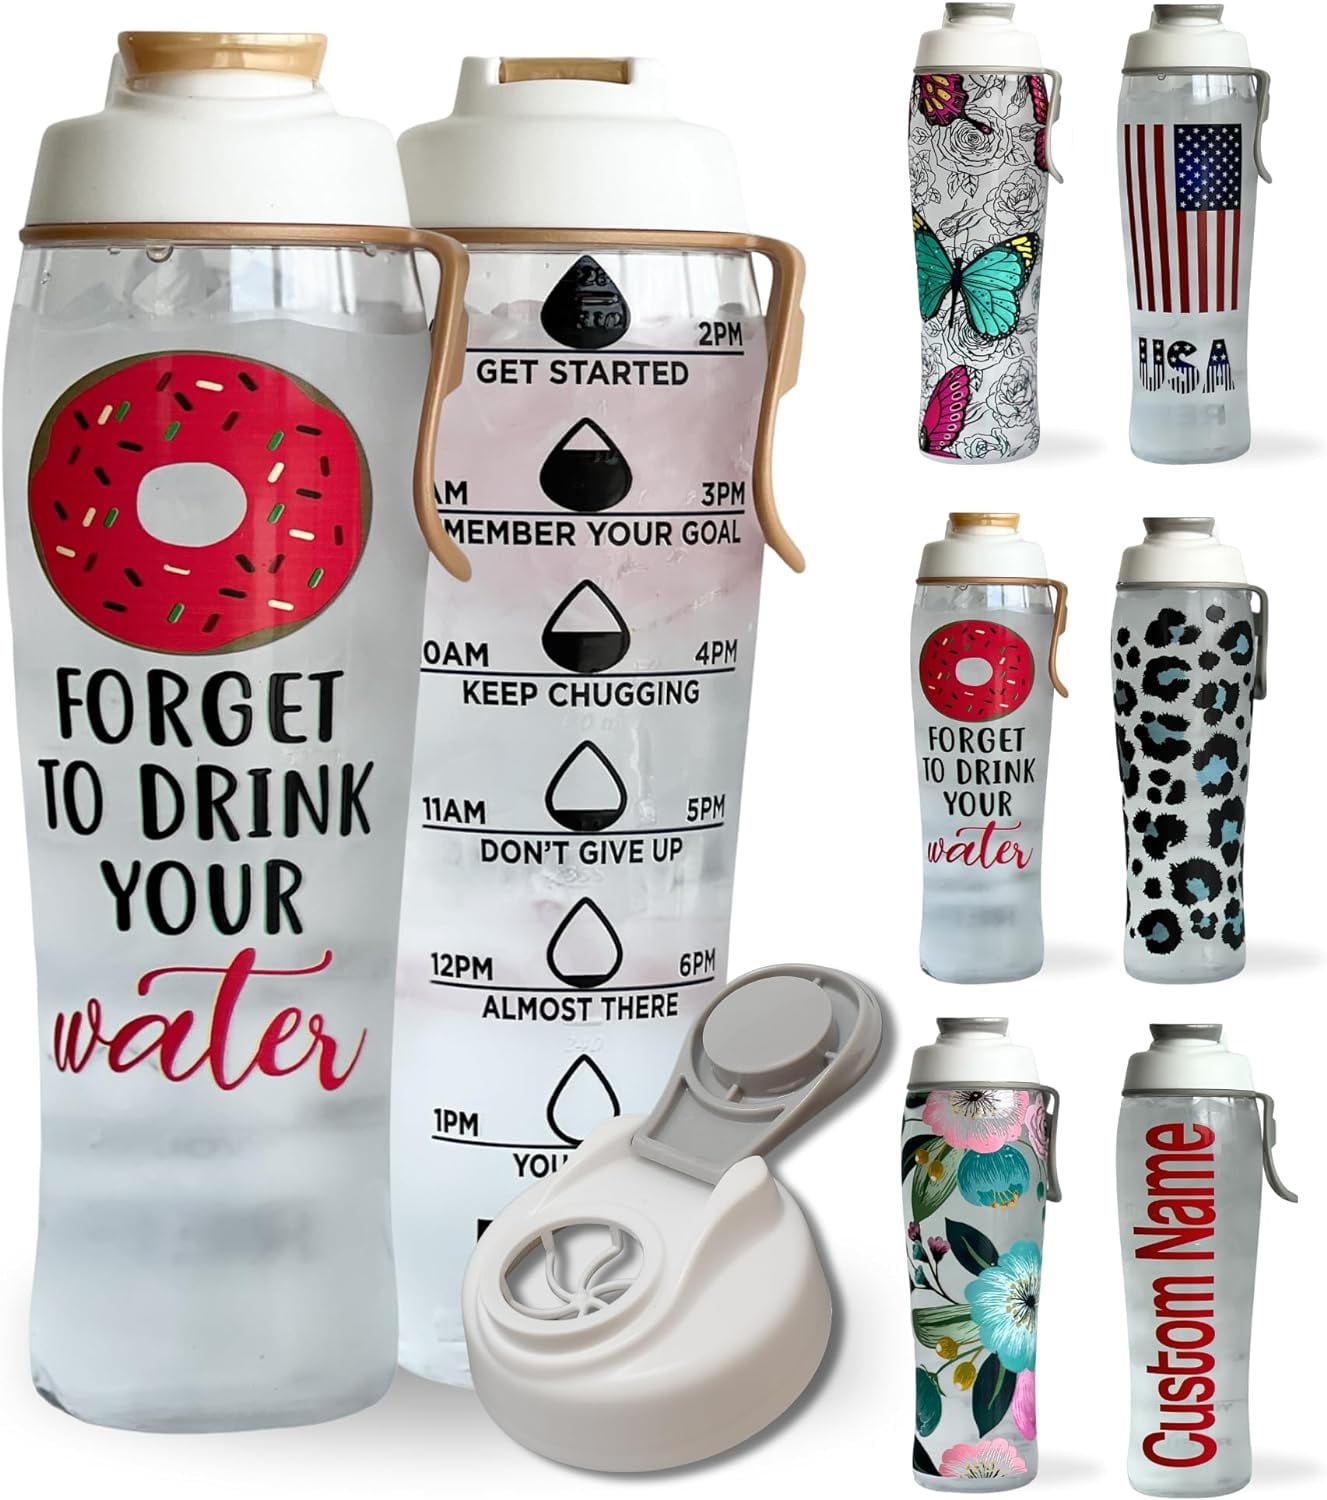 Doseno Reusable Water Bottle, Water Bottle with Time Marker, Plastic Water  Bottles to Ensure You Dri…See more Doseno Reusable Water Bottle, Water